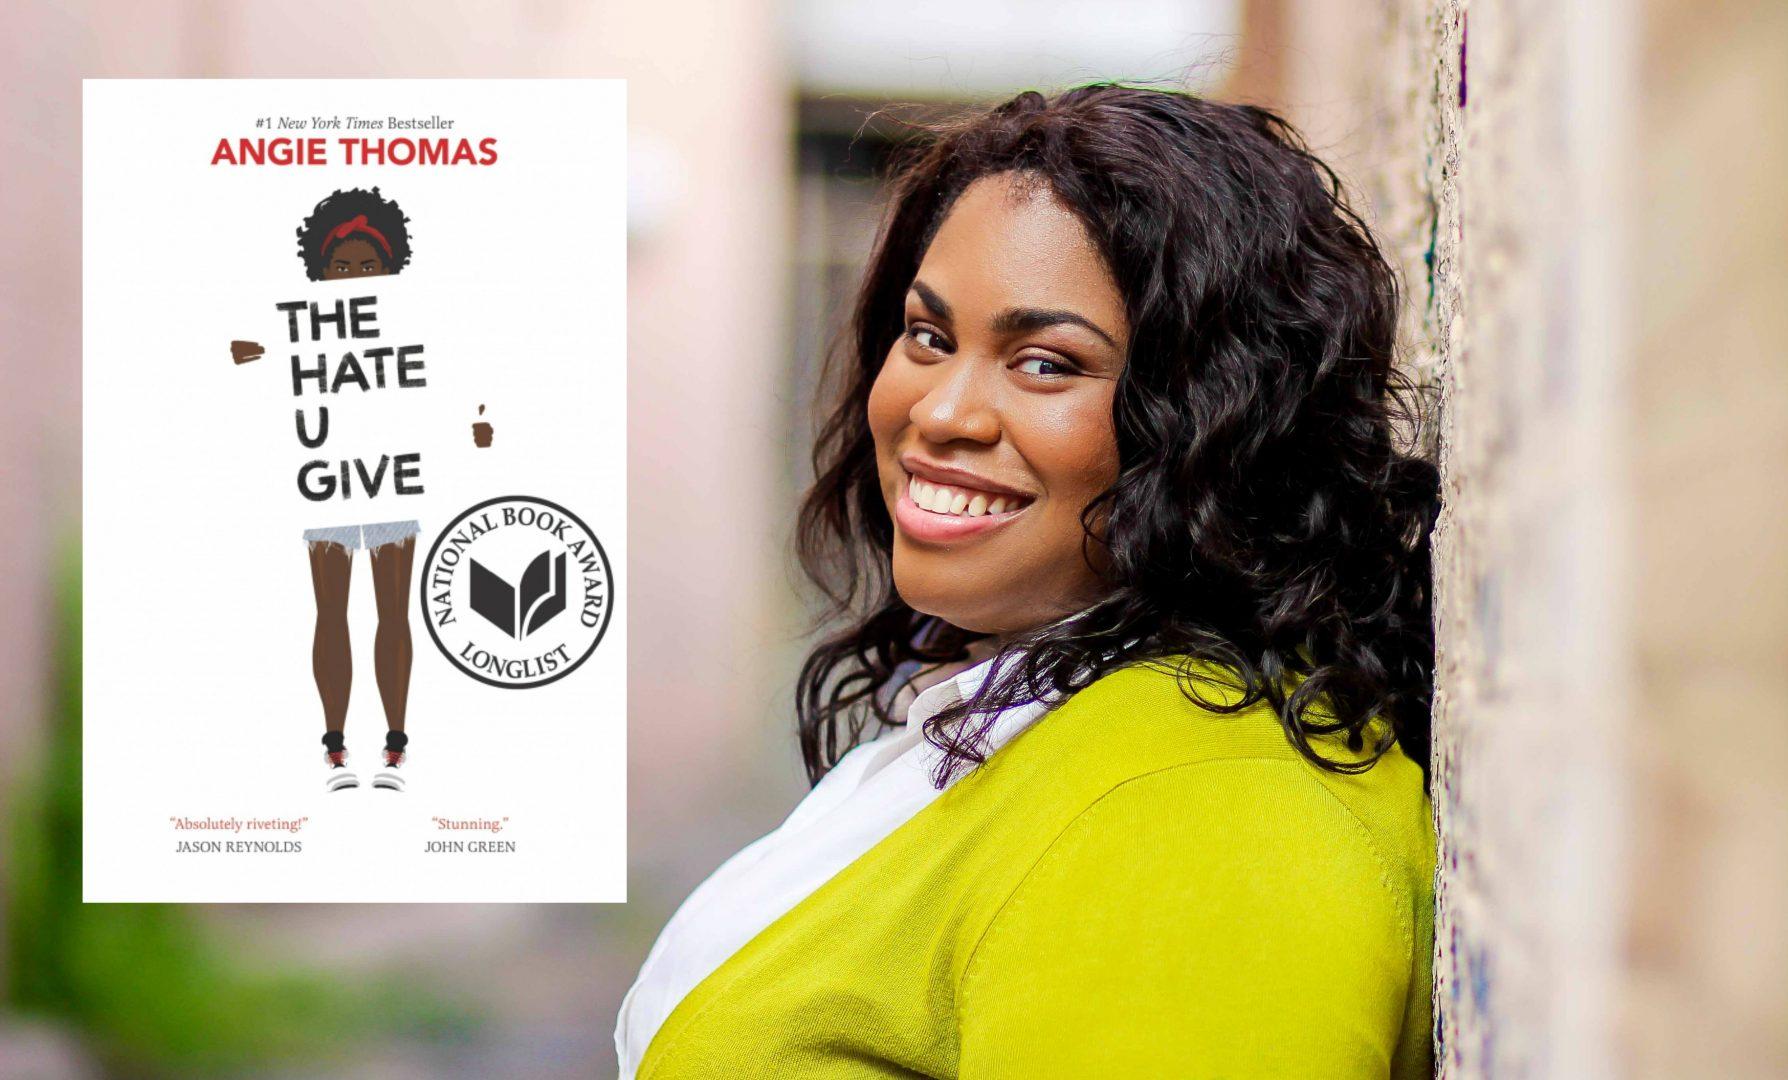 Angie Thomas is the author of the New York Times bestselling novel, ‘The Hate U Give.’ (HarperCollins/Anissa Hidouk)